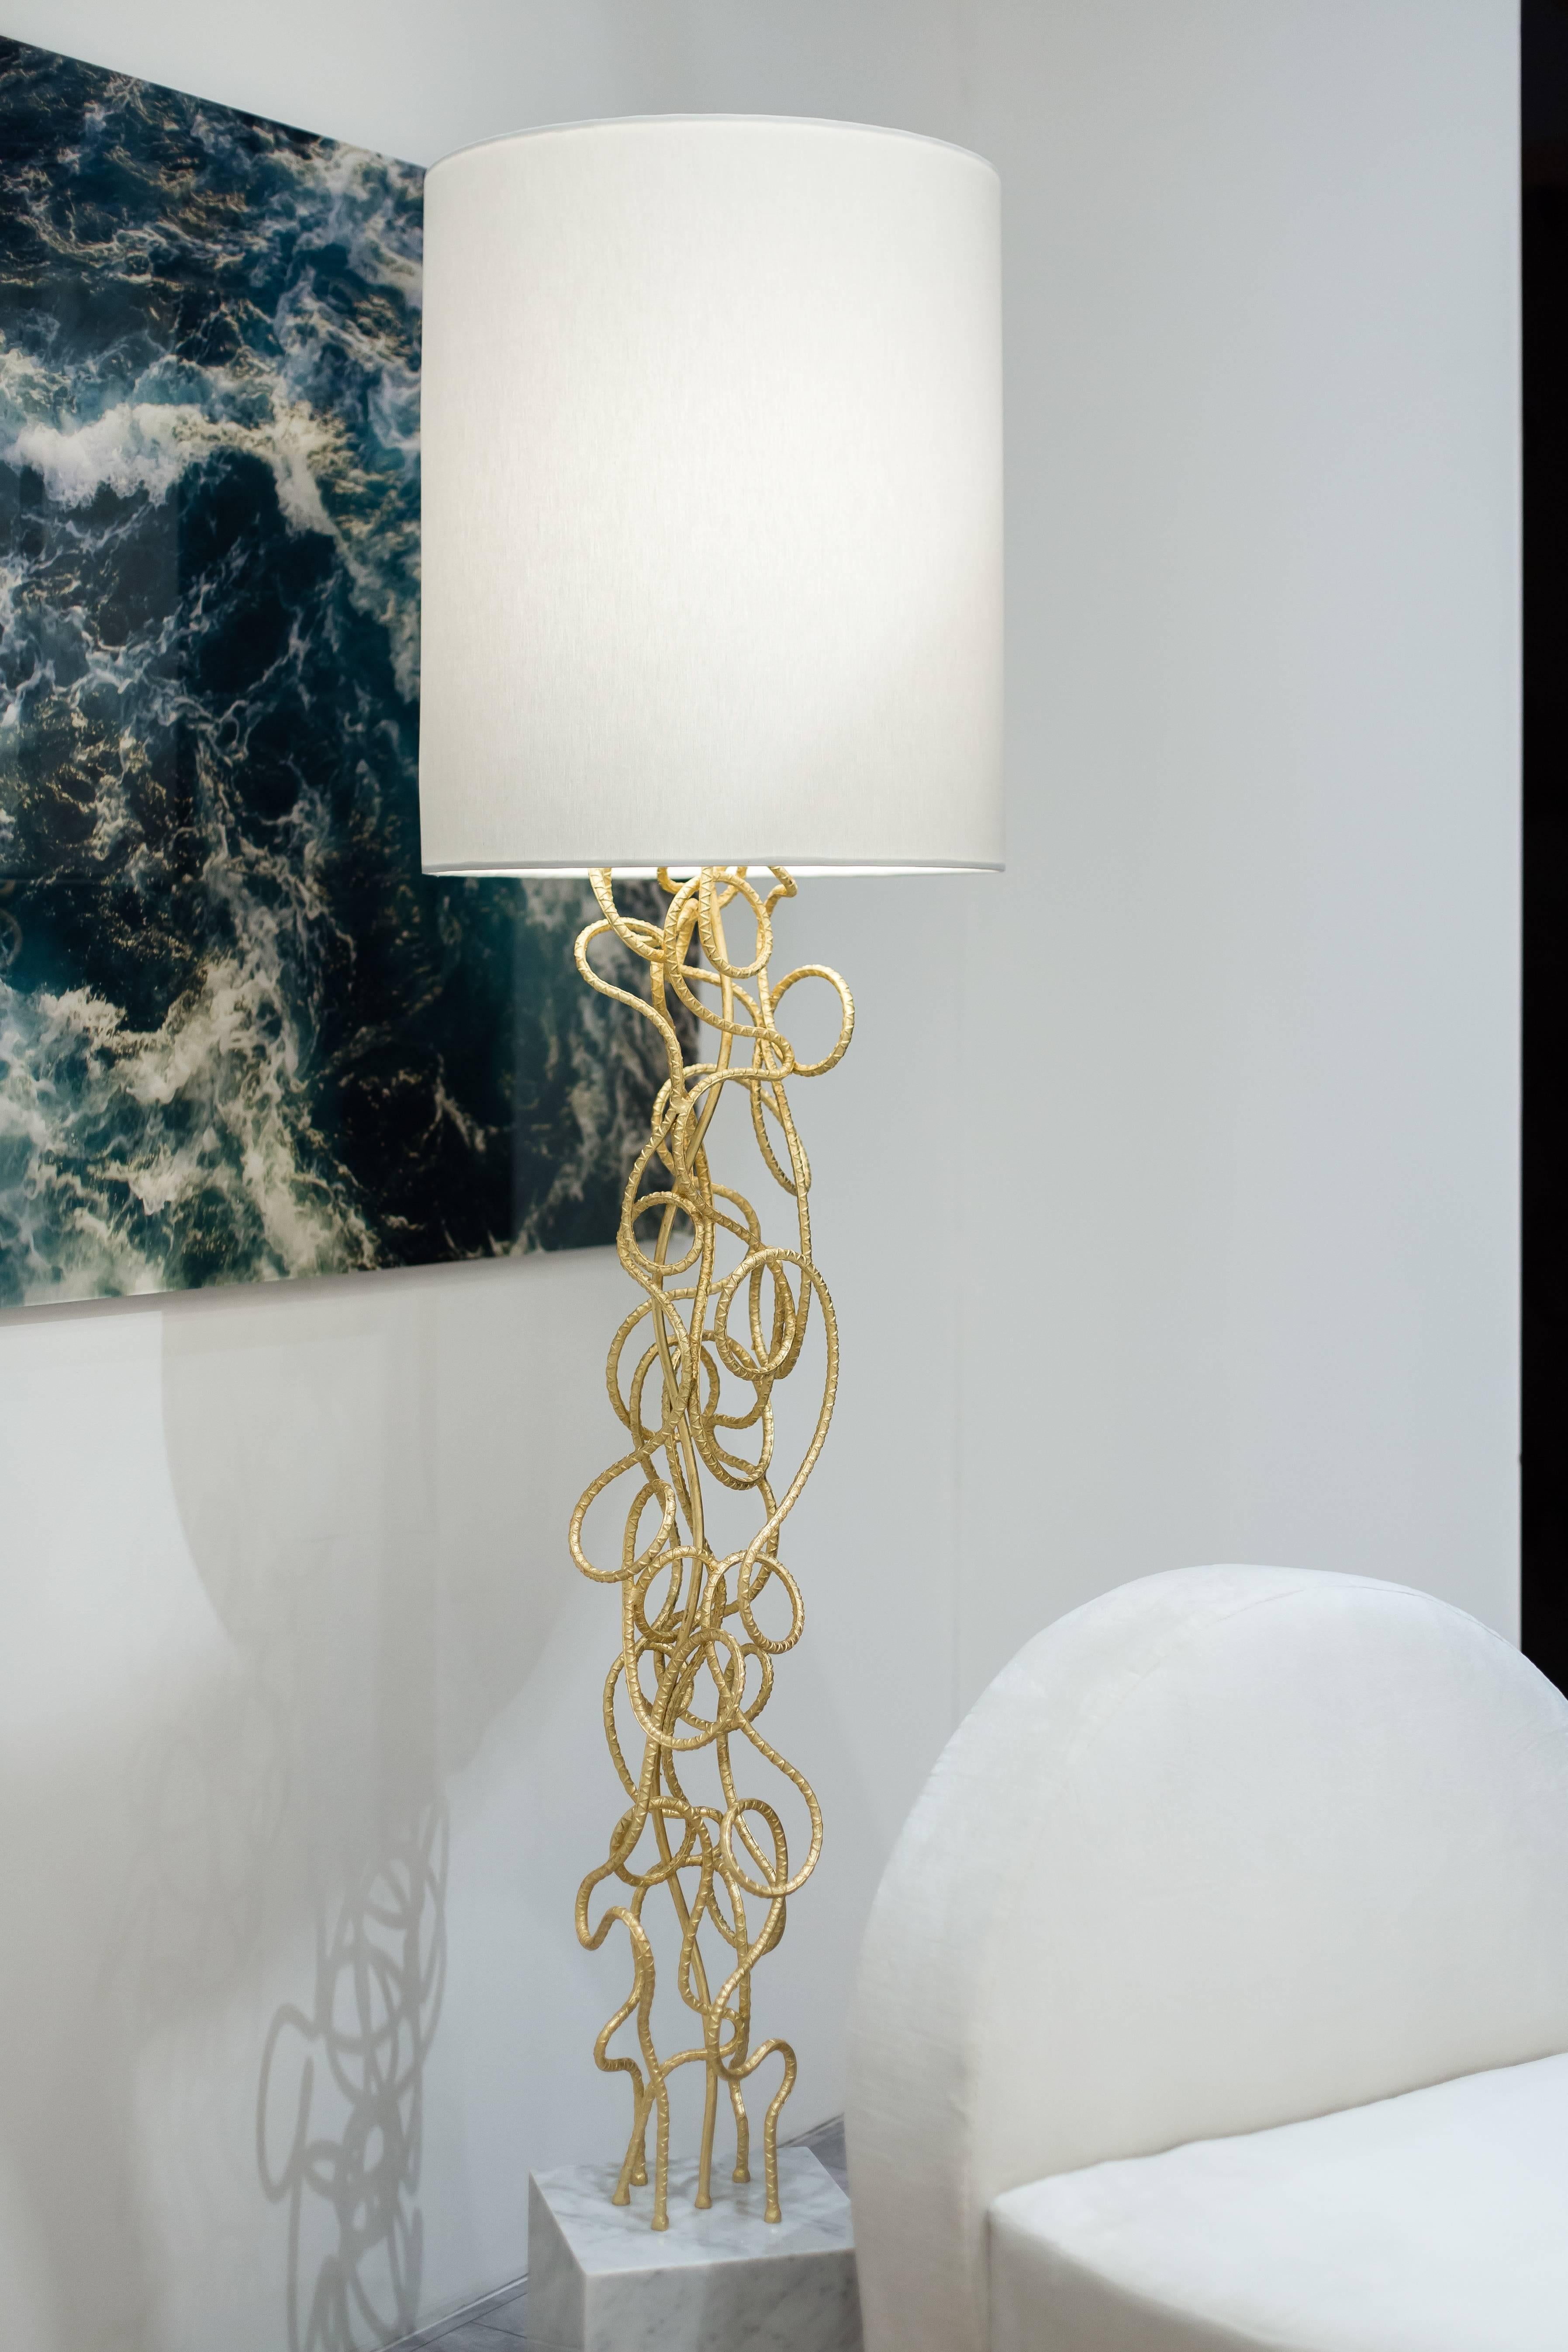 DAX FLOOR LAMP - Hand Twisted Rebar Modern Gold Leaf Floor Lamp w/ Carrara Marble Base

The Dax Floor Lamp is a stunning piece of artistry designed to create a sculptural statement in any room. It is crafted from hand-twisted gold-leafed rebar,